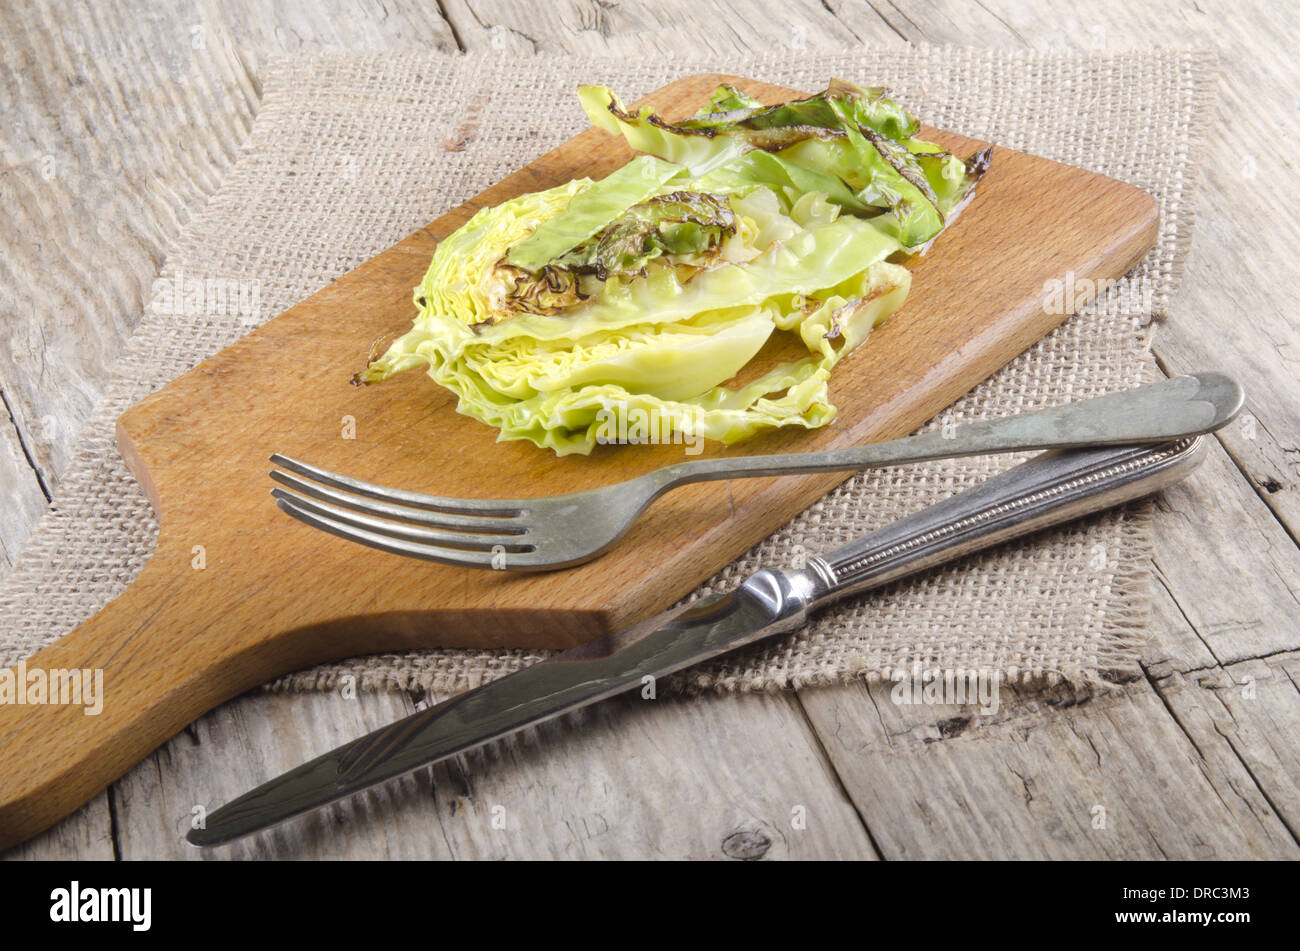 roasted cabbage slice with fork and knife on a wooden board Stock Photo